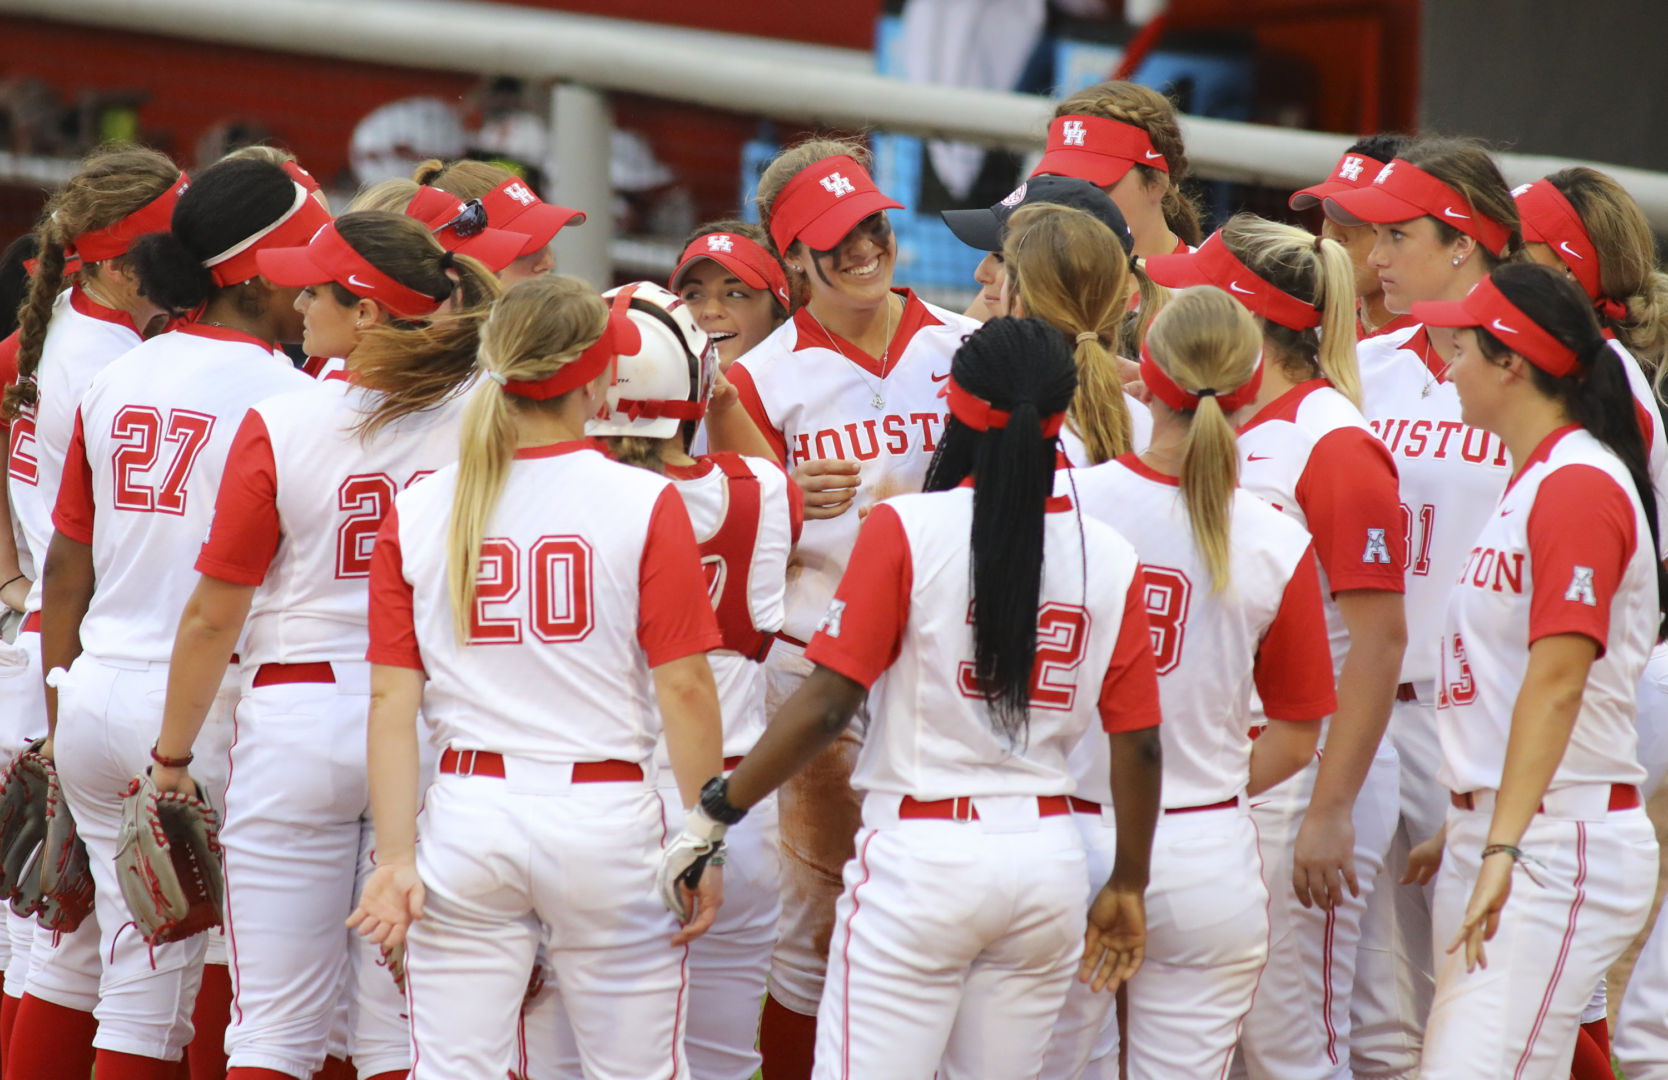 The UH softball team played against Sam Houston State in a doubleheader on Wednesday. | File photo